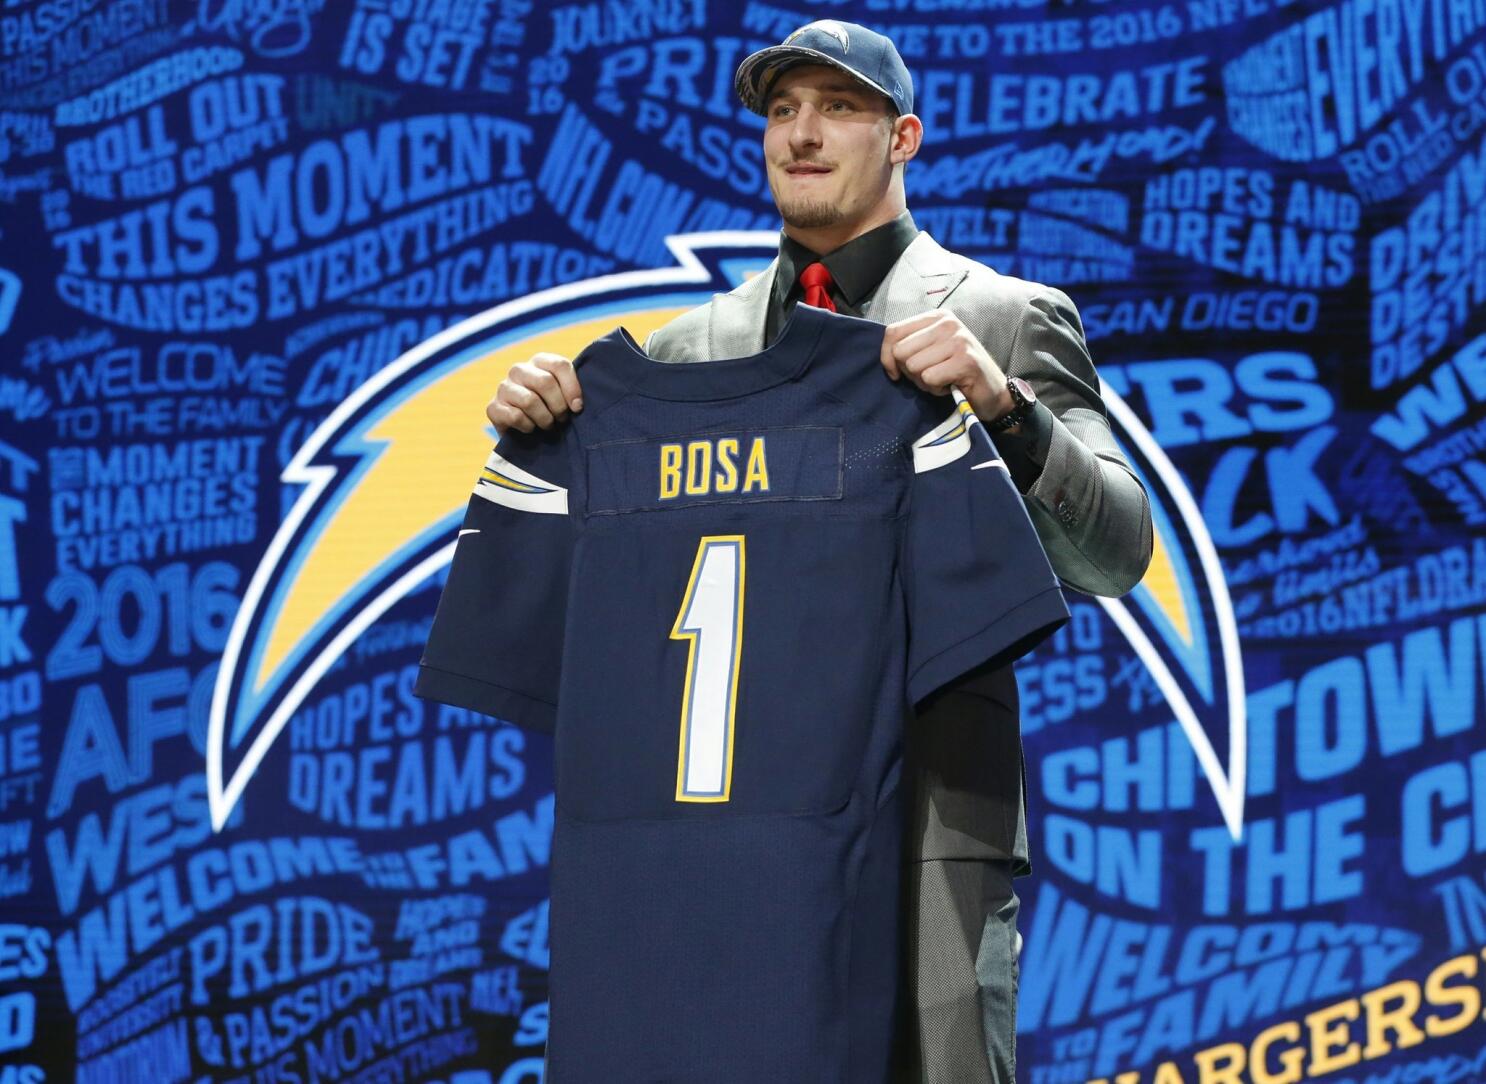 Chargers surprise with Joey Bosa at No. 3 pick in NFL draft